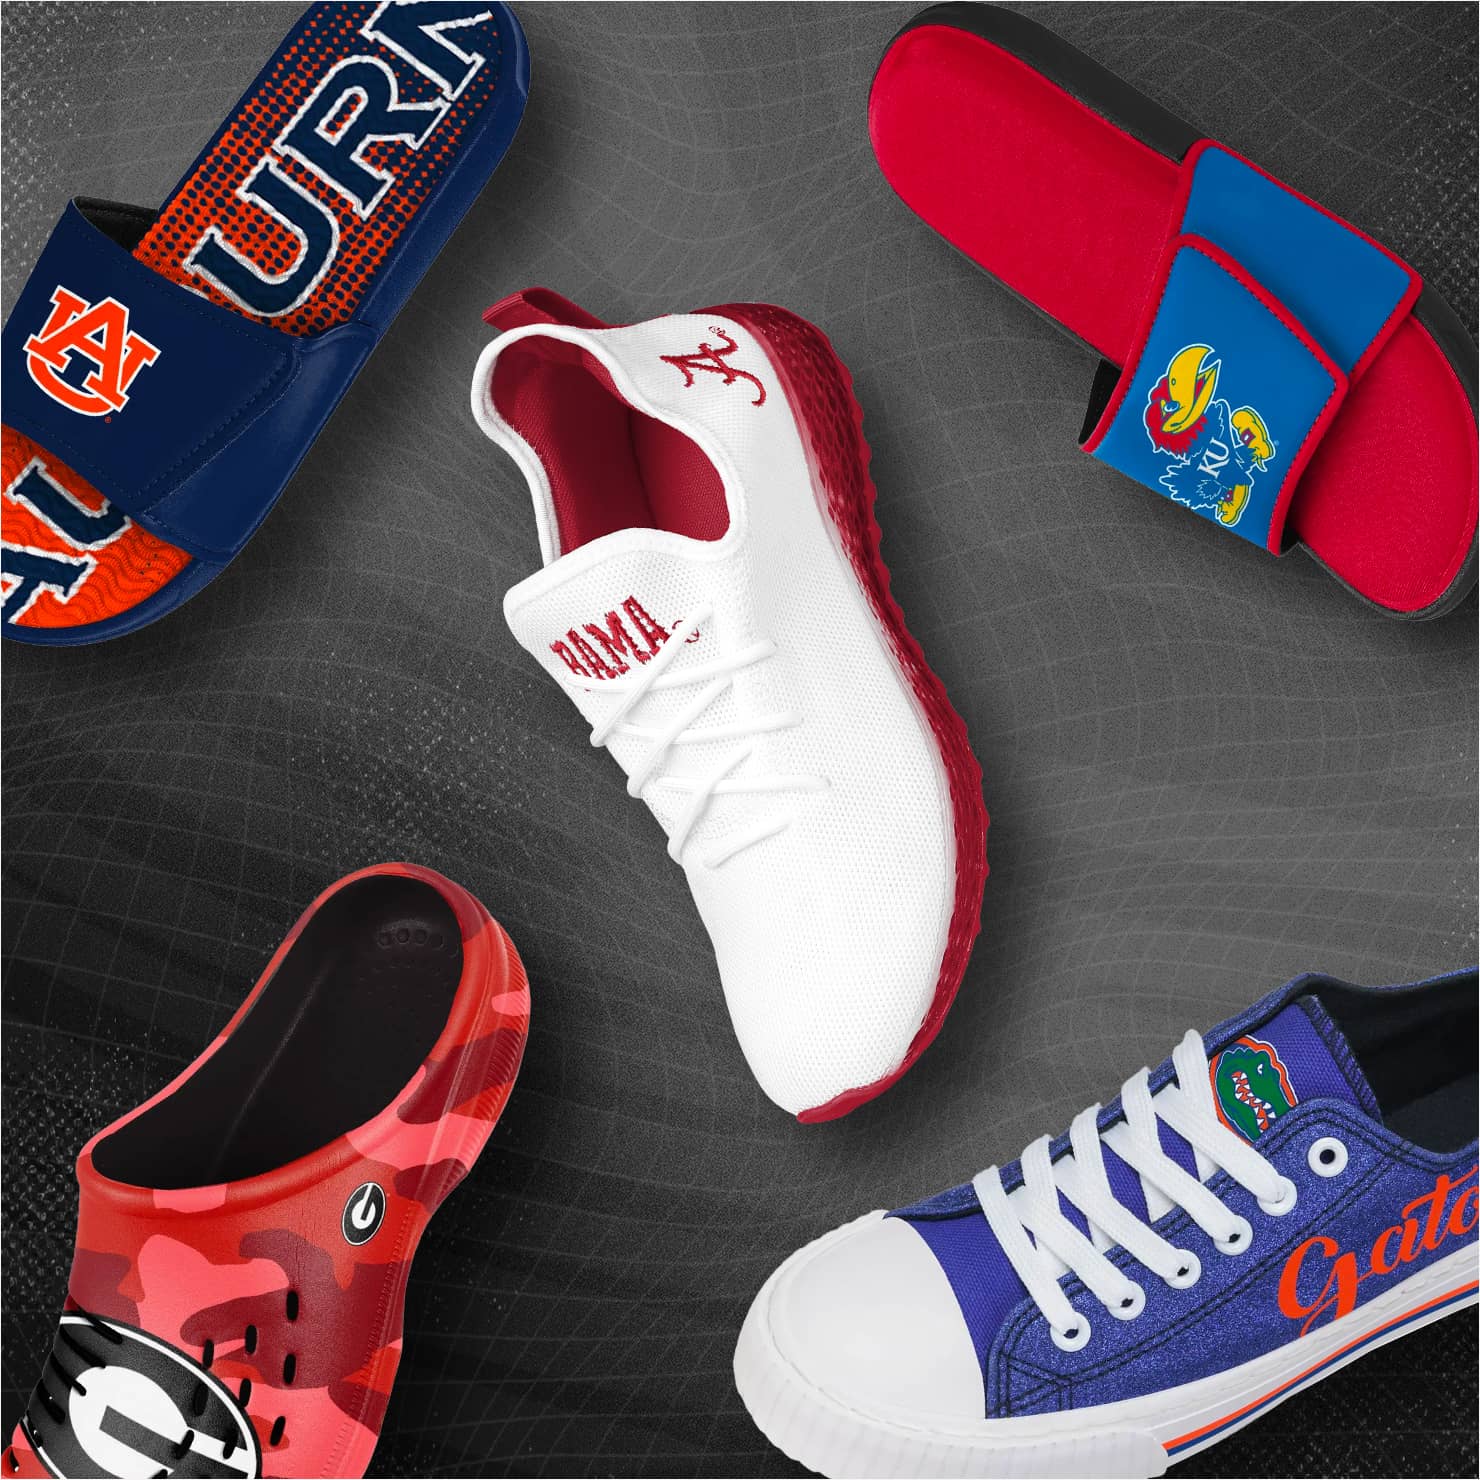 FOCO NFL Shop. Collectibles, Apparel, and Fan Gear.